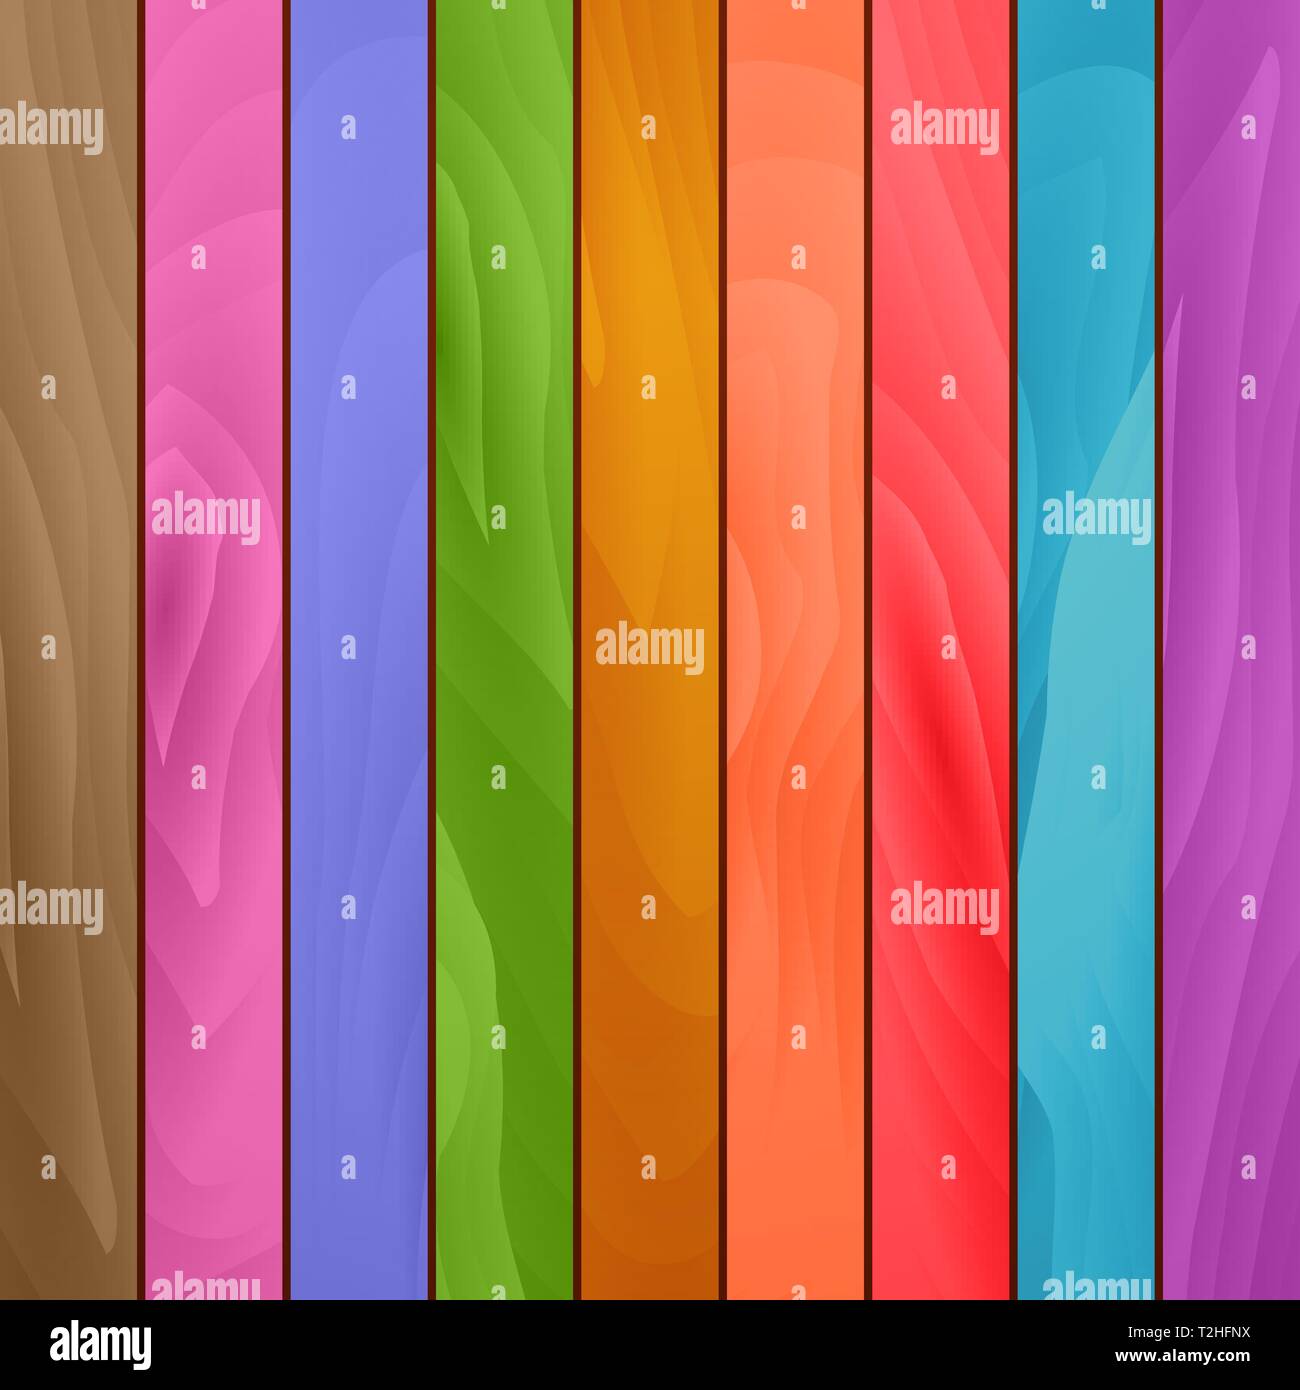 Colored wood planks background vector Stock Vector